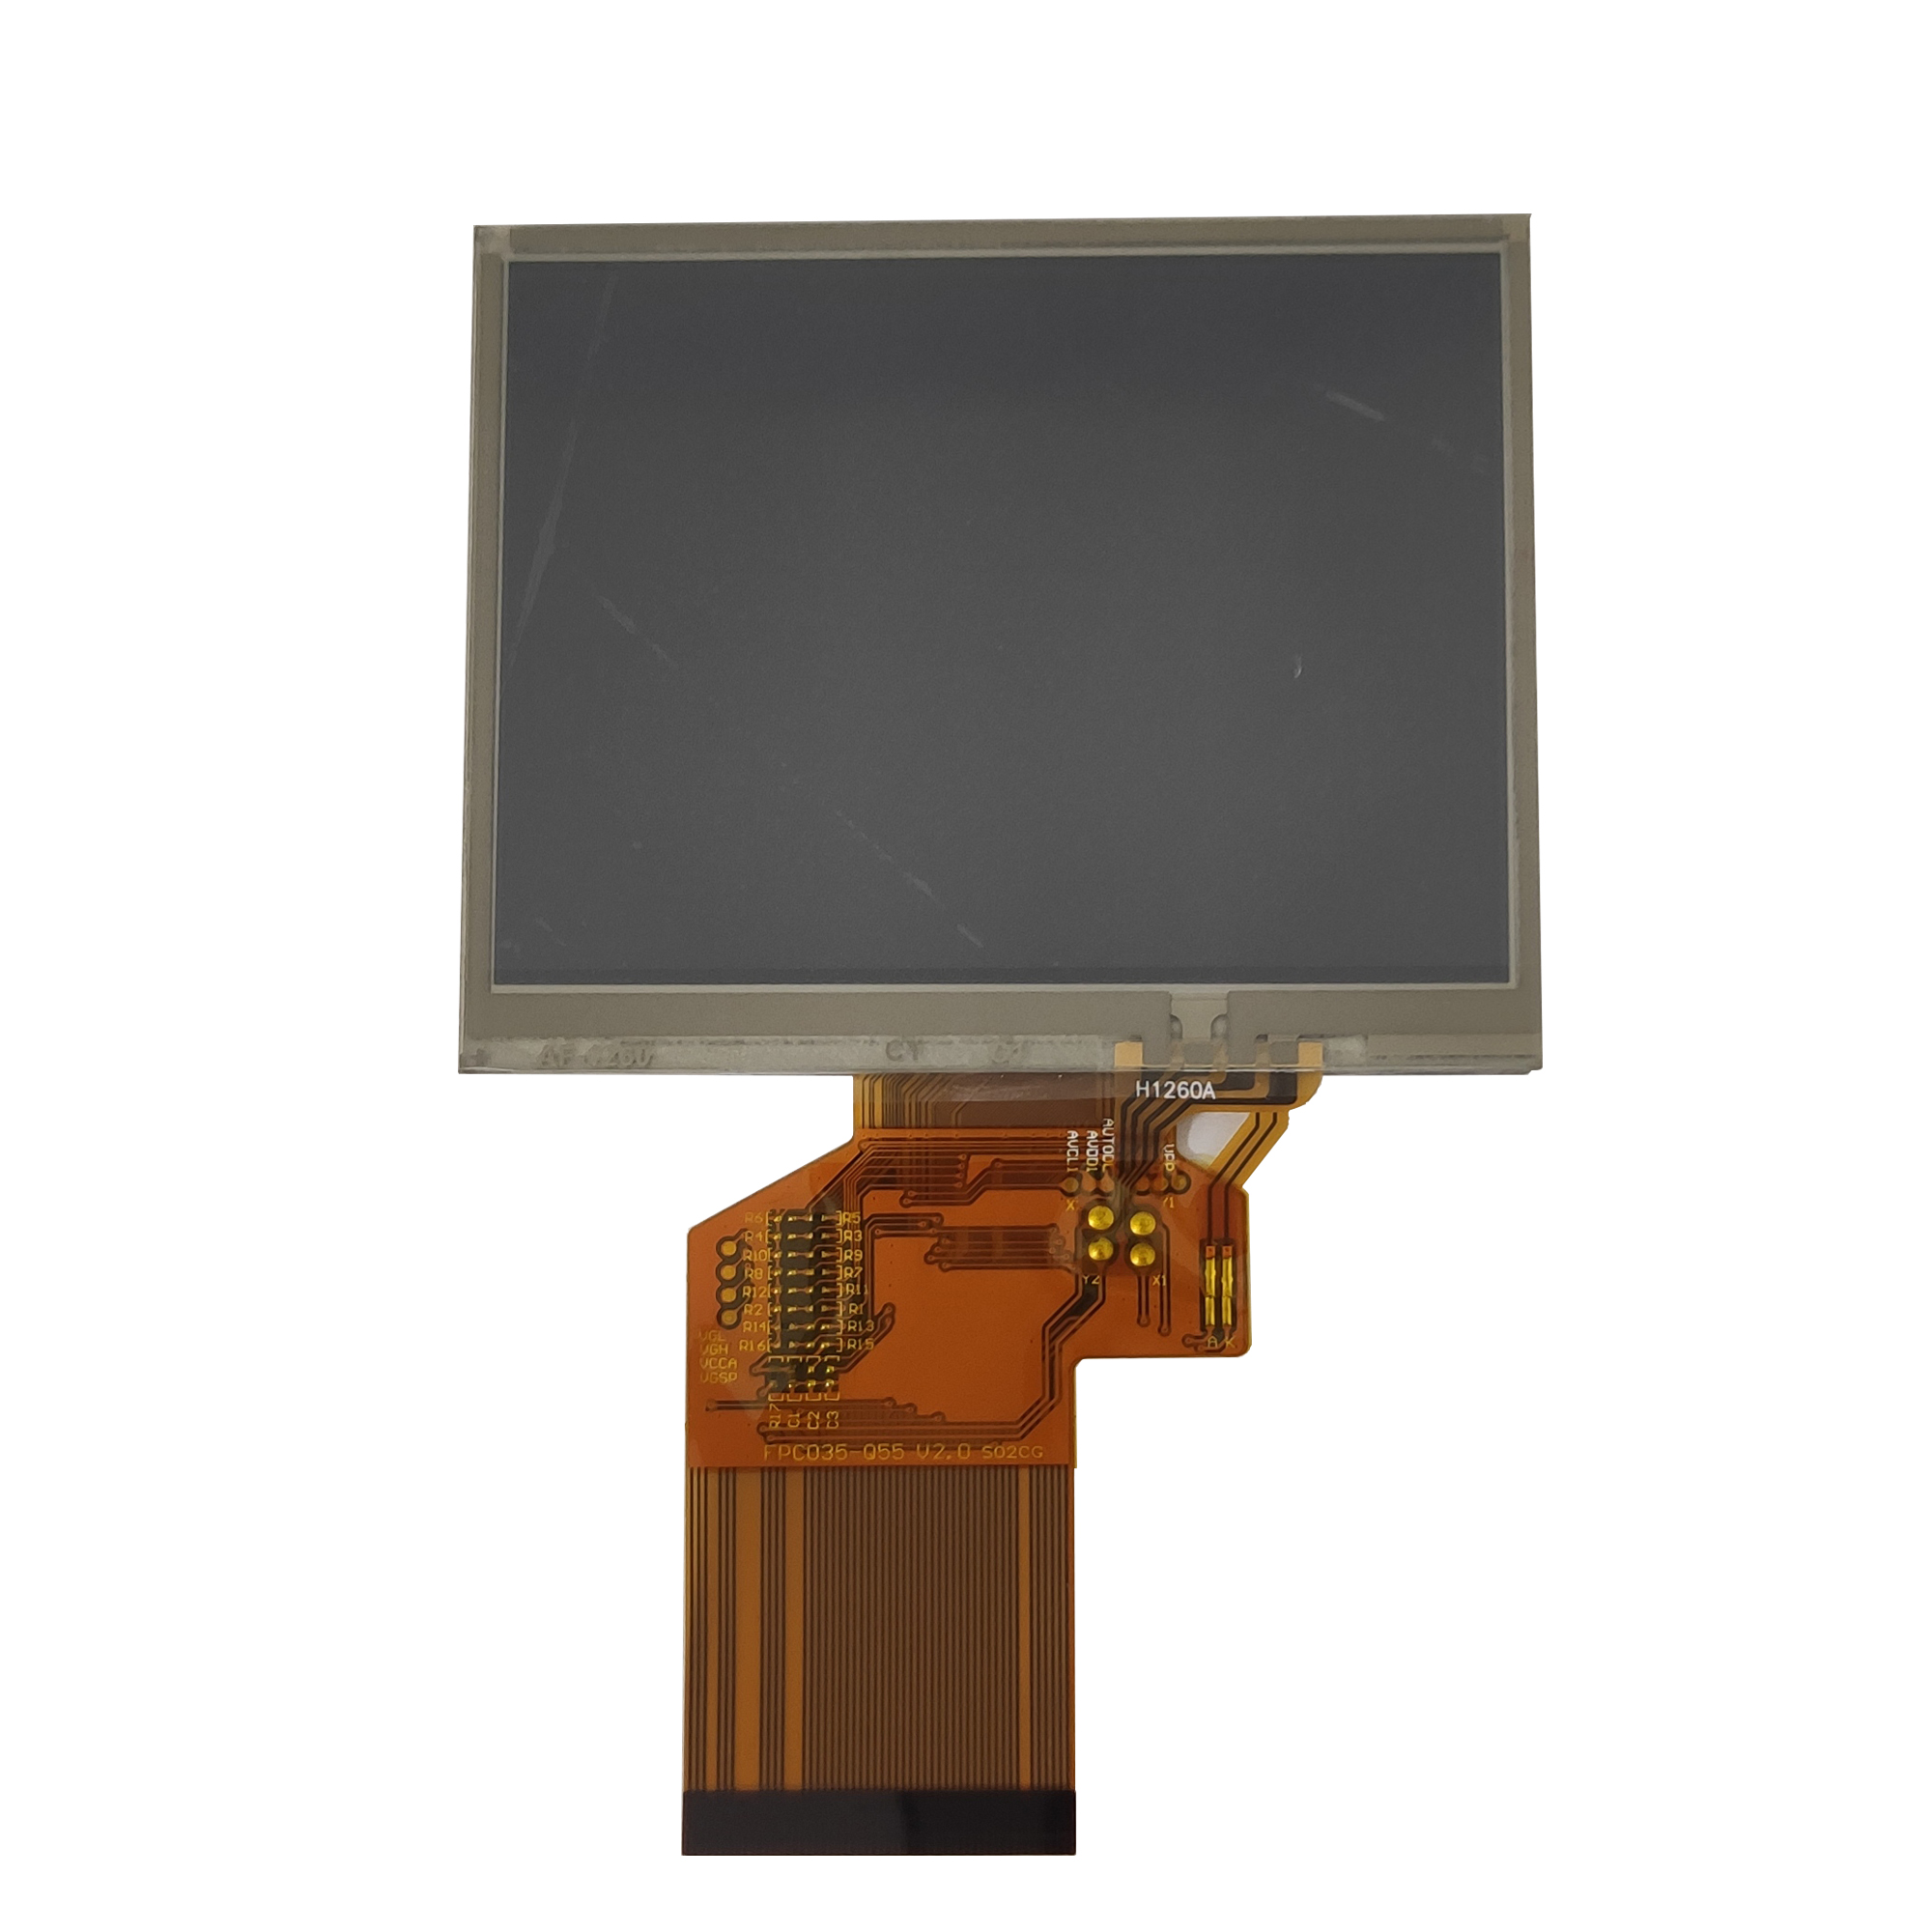 3.5 inch 320*240 IPS TFT LCD display with standard 4 Wires RTP